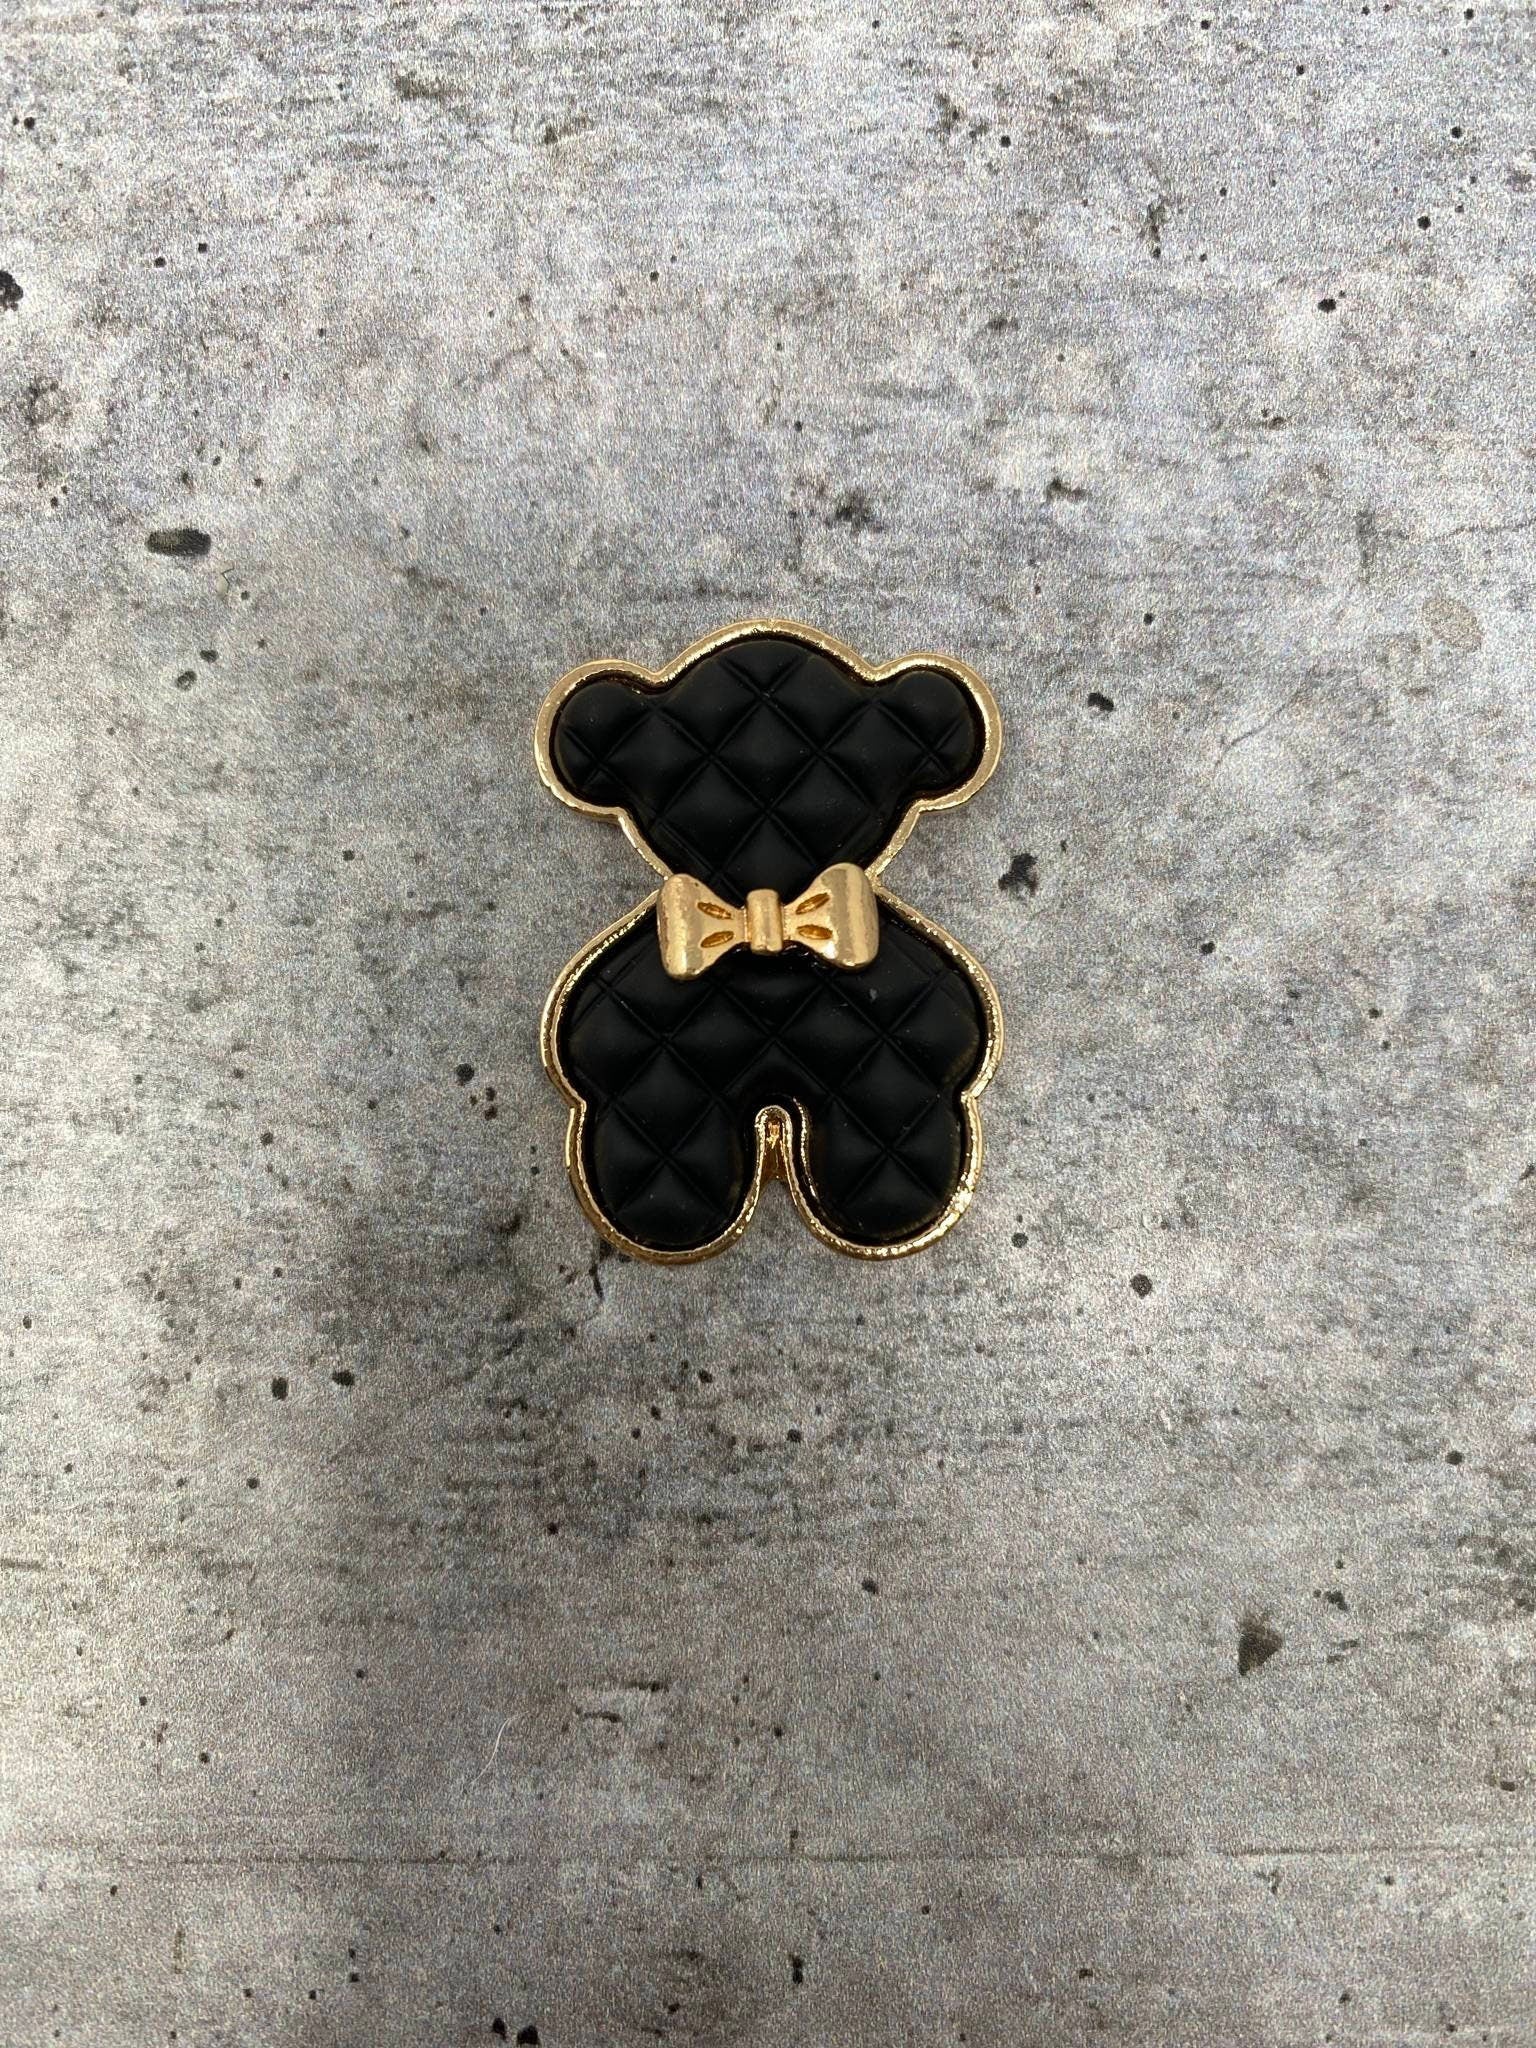 Exclusive, BLACK "Bear" Tufted w/Gold Bow Charm, 1-pc Flatback Charm for CR O CS, Phone Cases, Sunglasses, Decor, and More! Size 2"